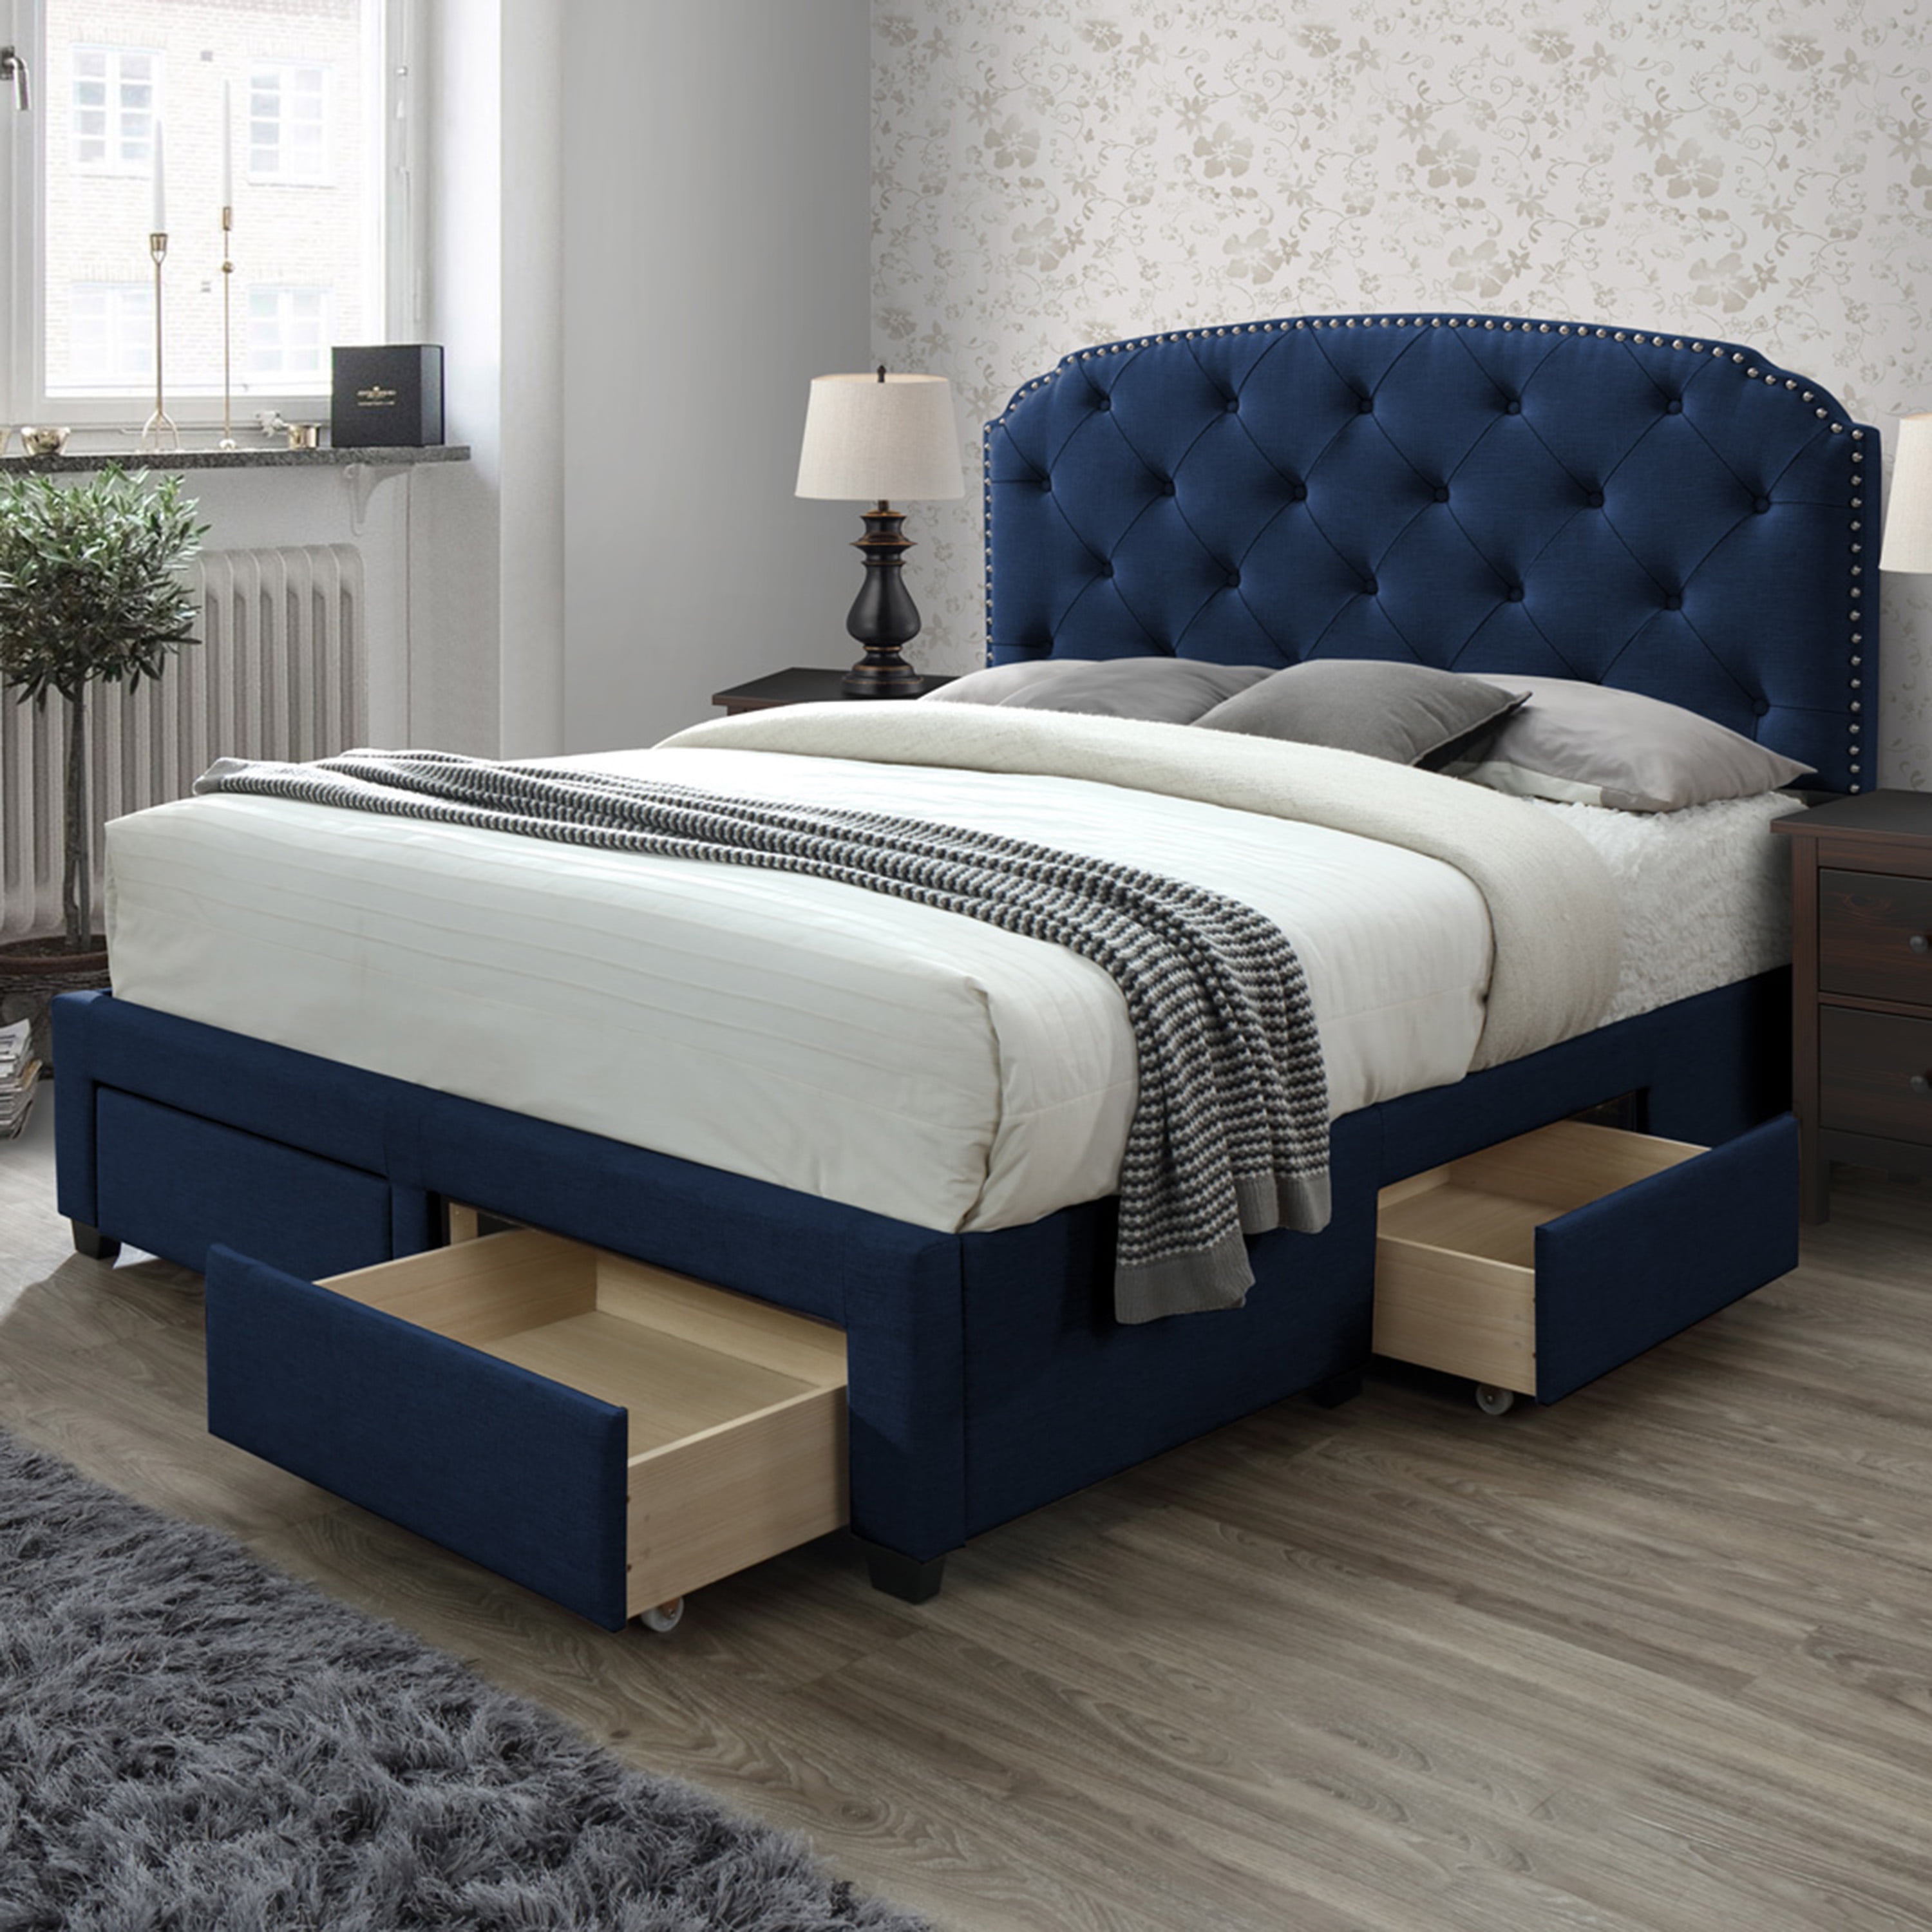 DG Casa Argo Tufted Upholstered Panel Bed Frame with Storage Drawers